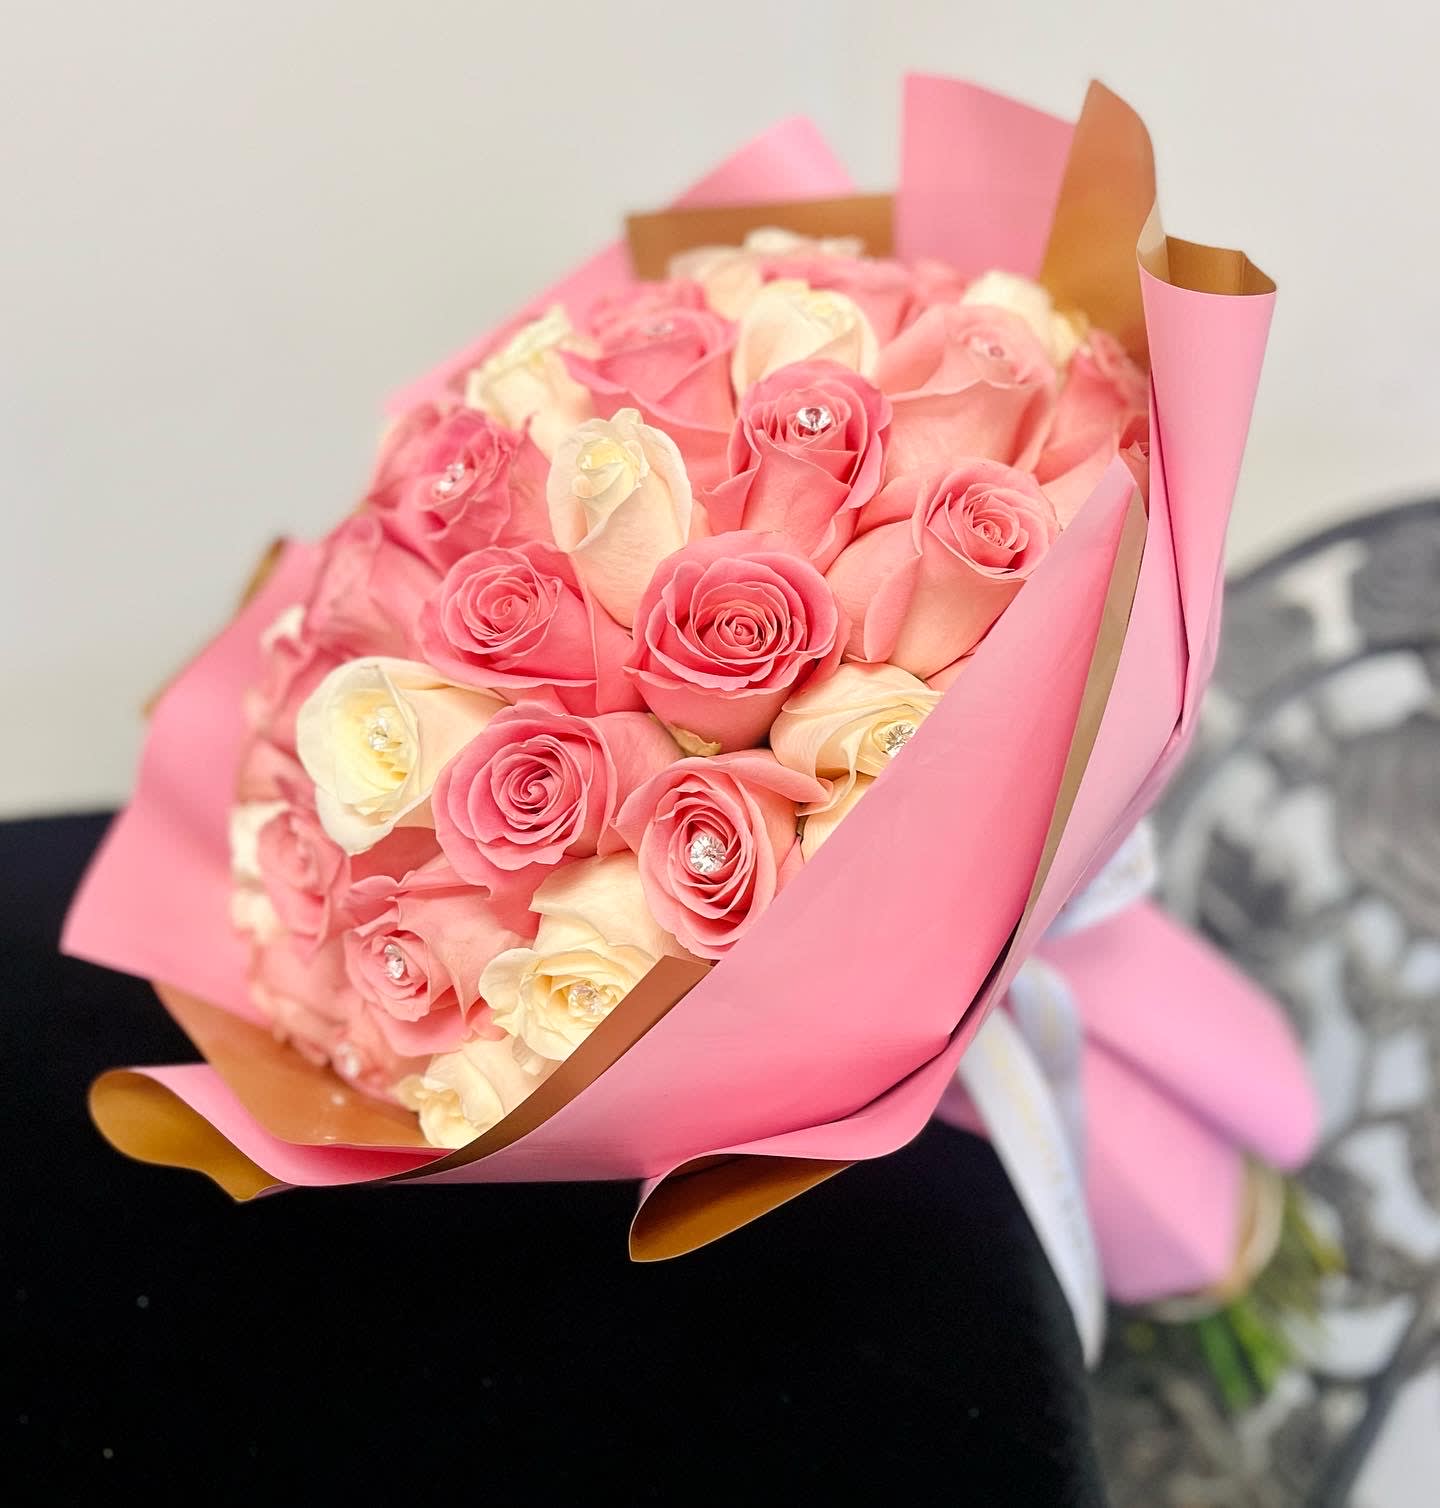 50 ROSES BOUQUET by Memorable Flowers